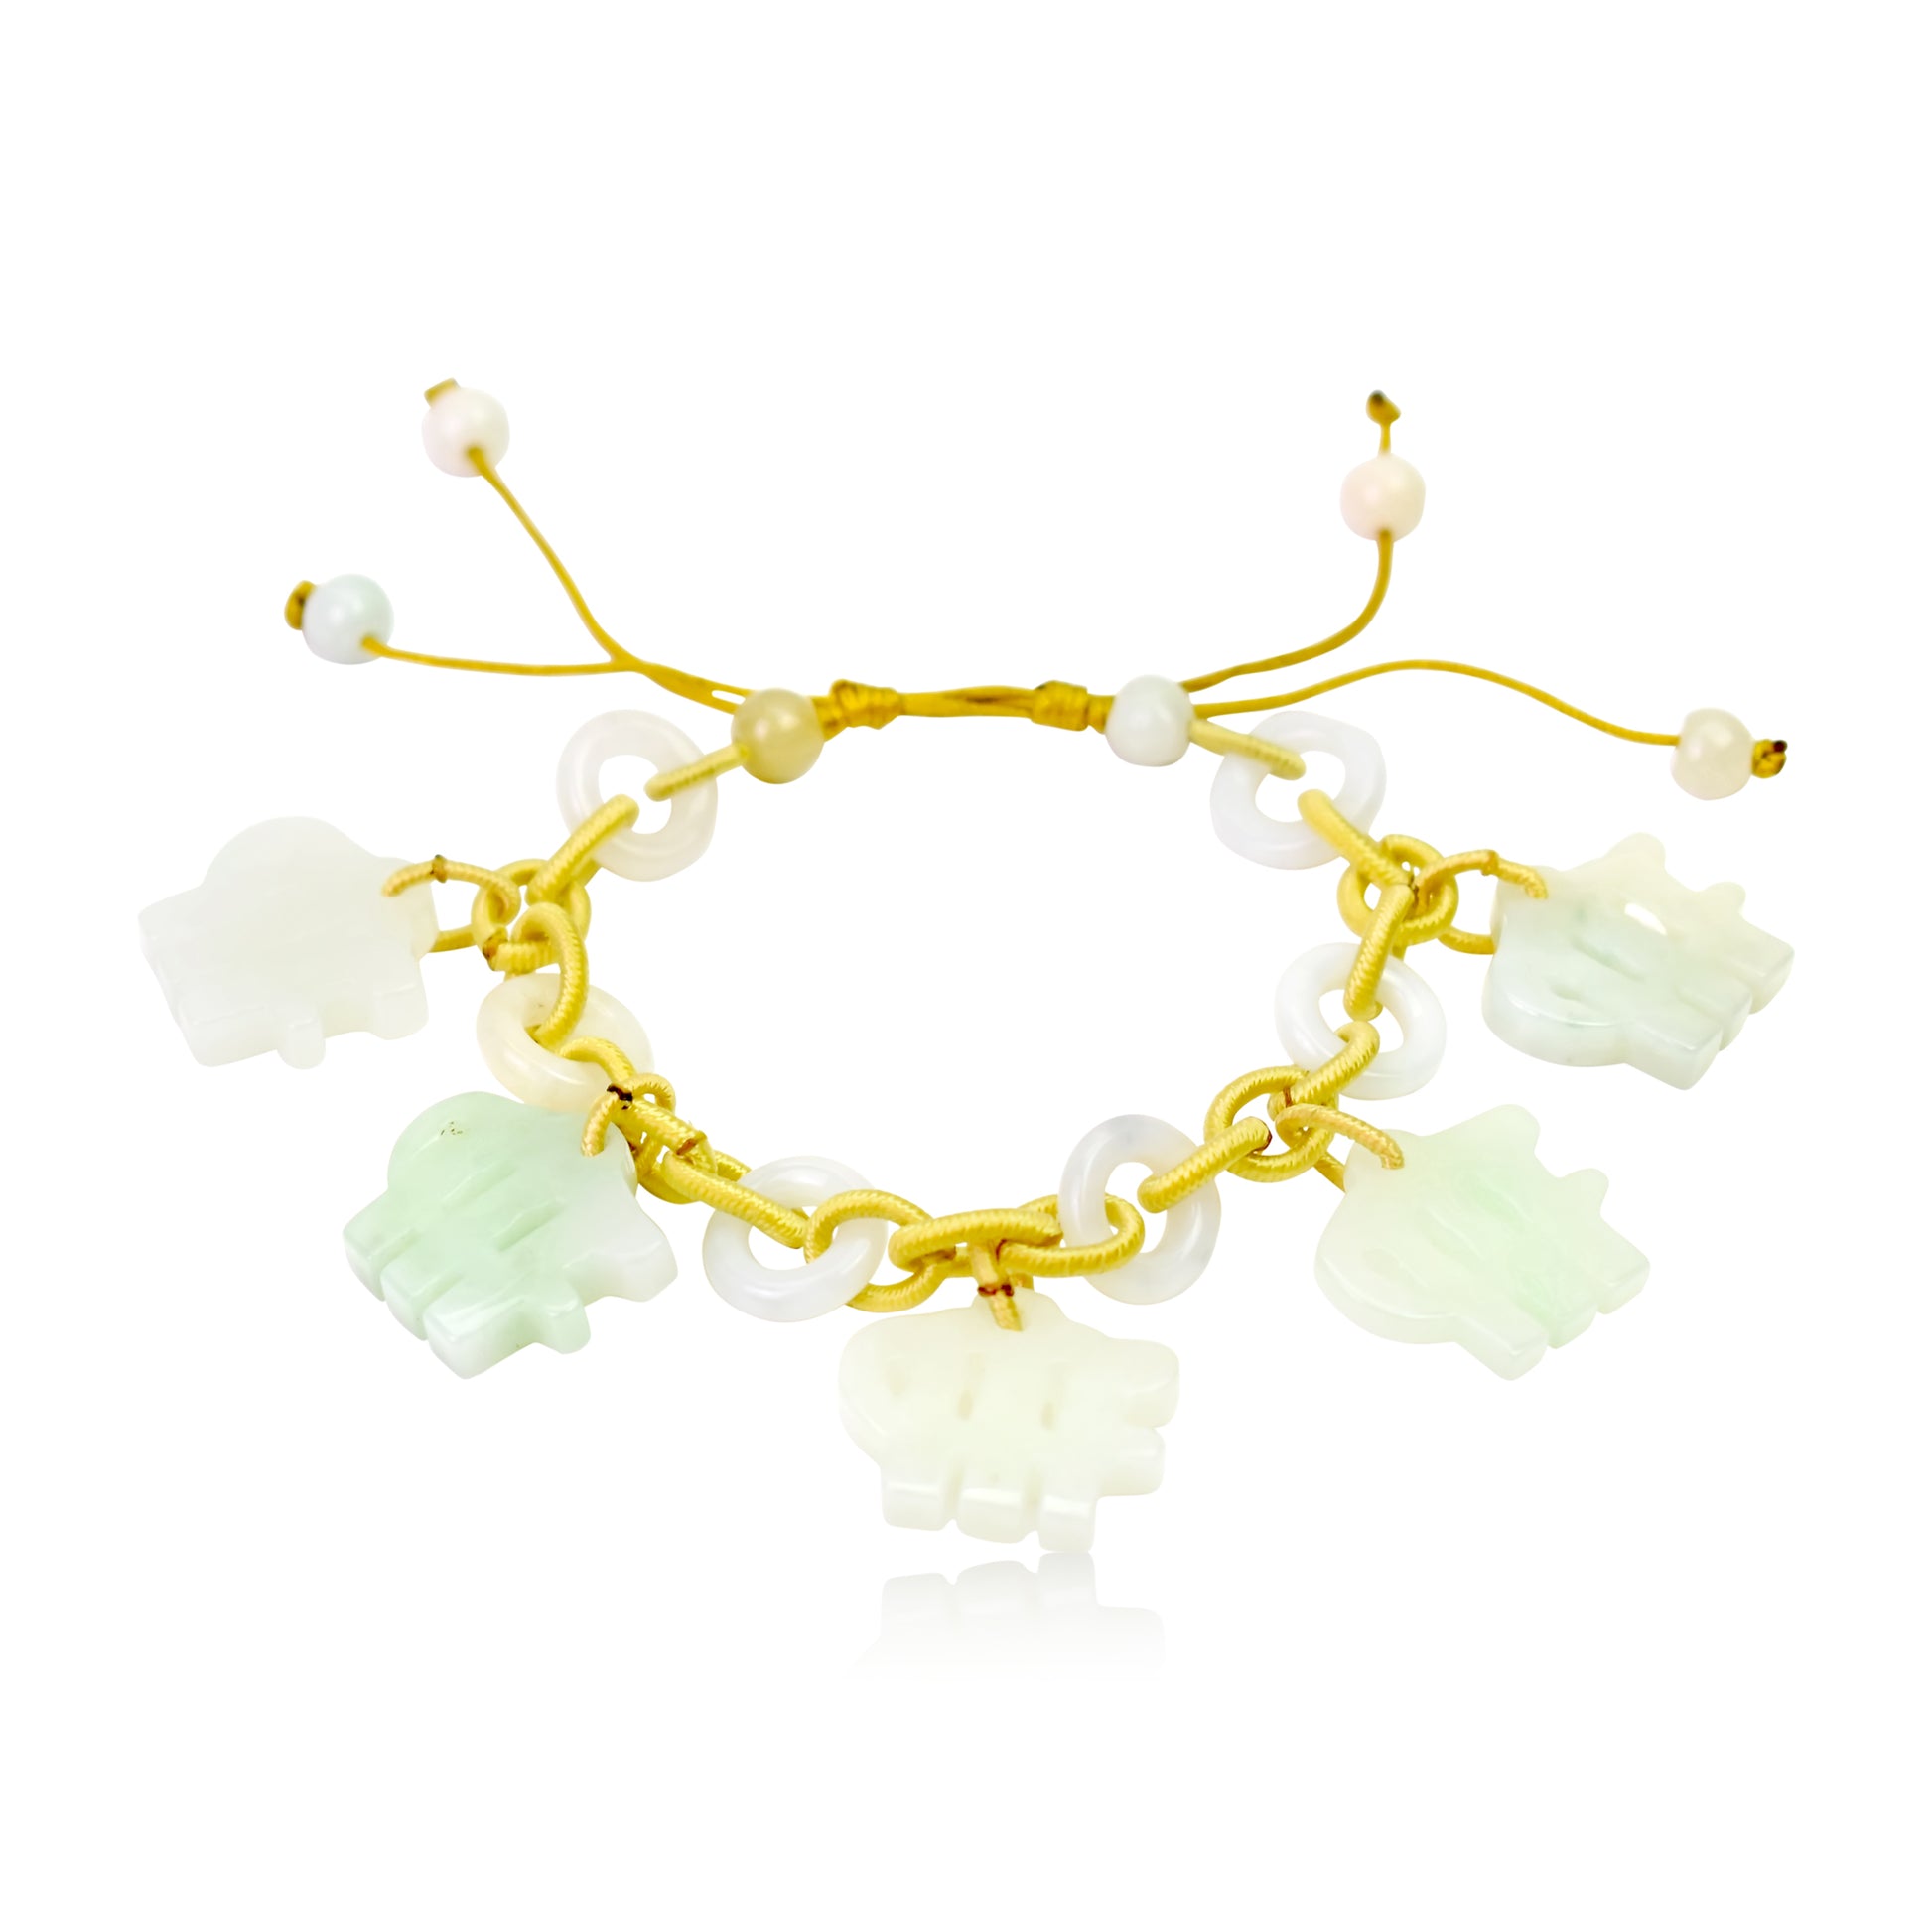 A Perfect Gift for the Methodical Virgo with this Jade Bracelet made with Yellow Cord